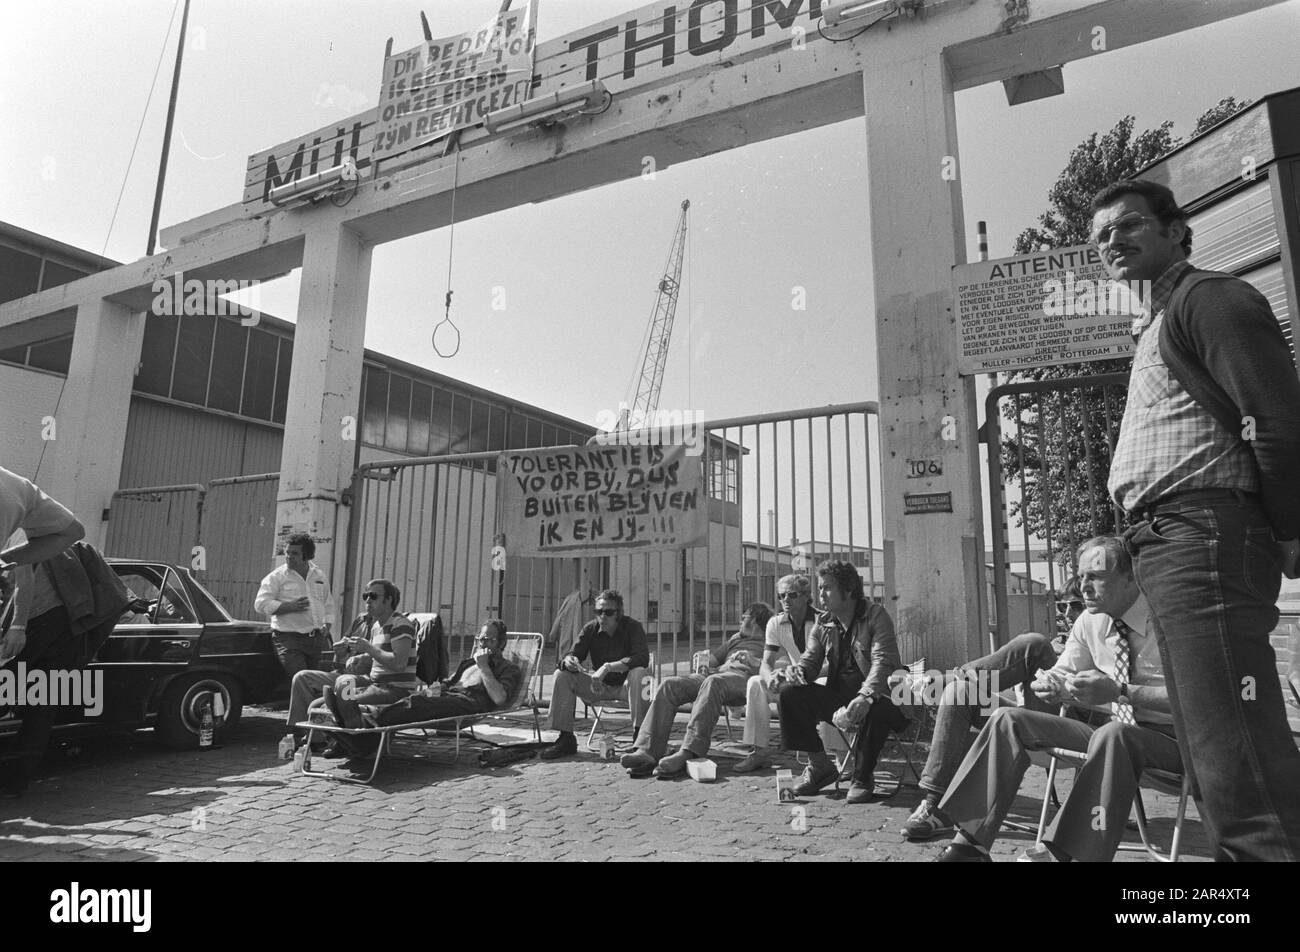 Havenstaking Rotterdam 1979  Fouragering of posting strikers; banner: Tolerance is over so stay outside me and you Date: September 6, 1979 Location: Rotterdam, Zuid-Holland Keywords: employment conditions, companies, occupations, port staff, ports, banners, strikes, food supply Stock Photo